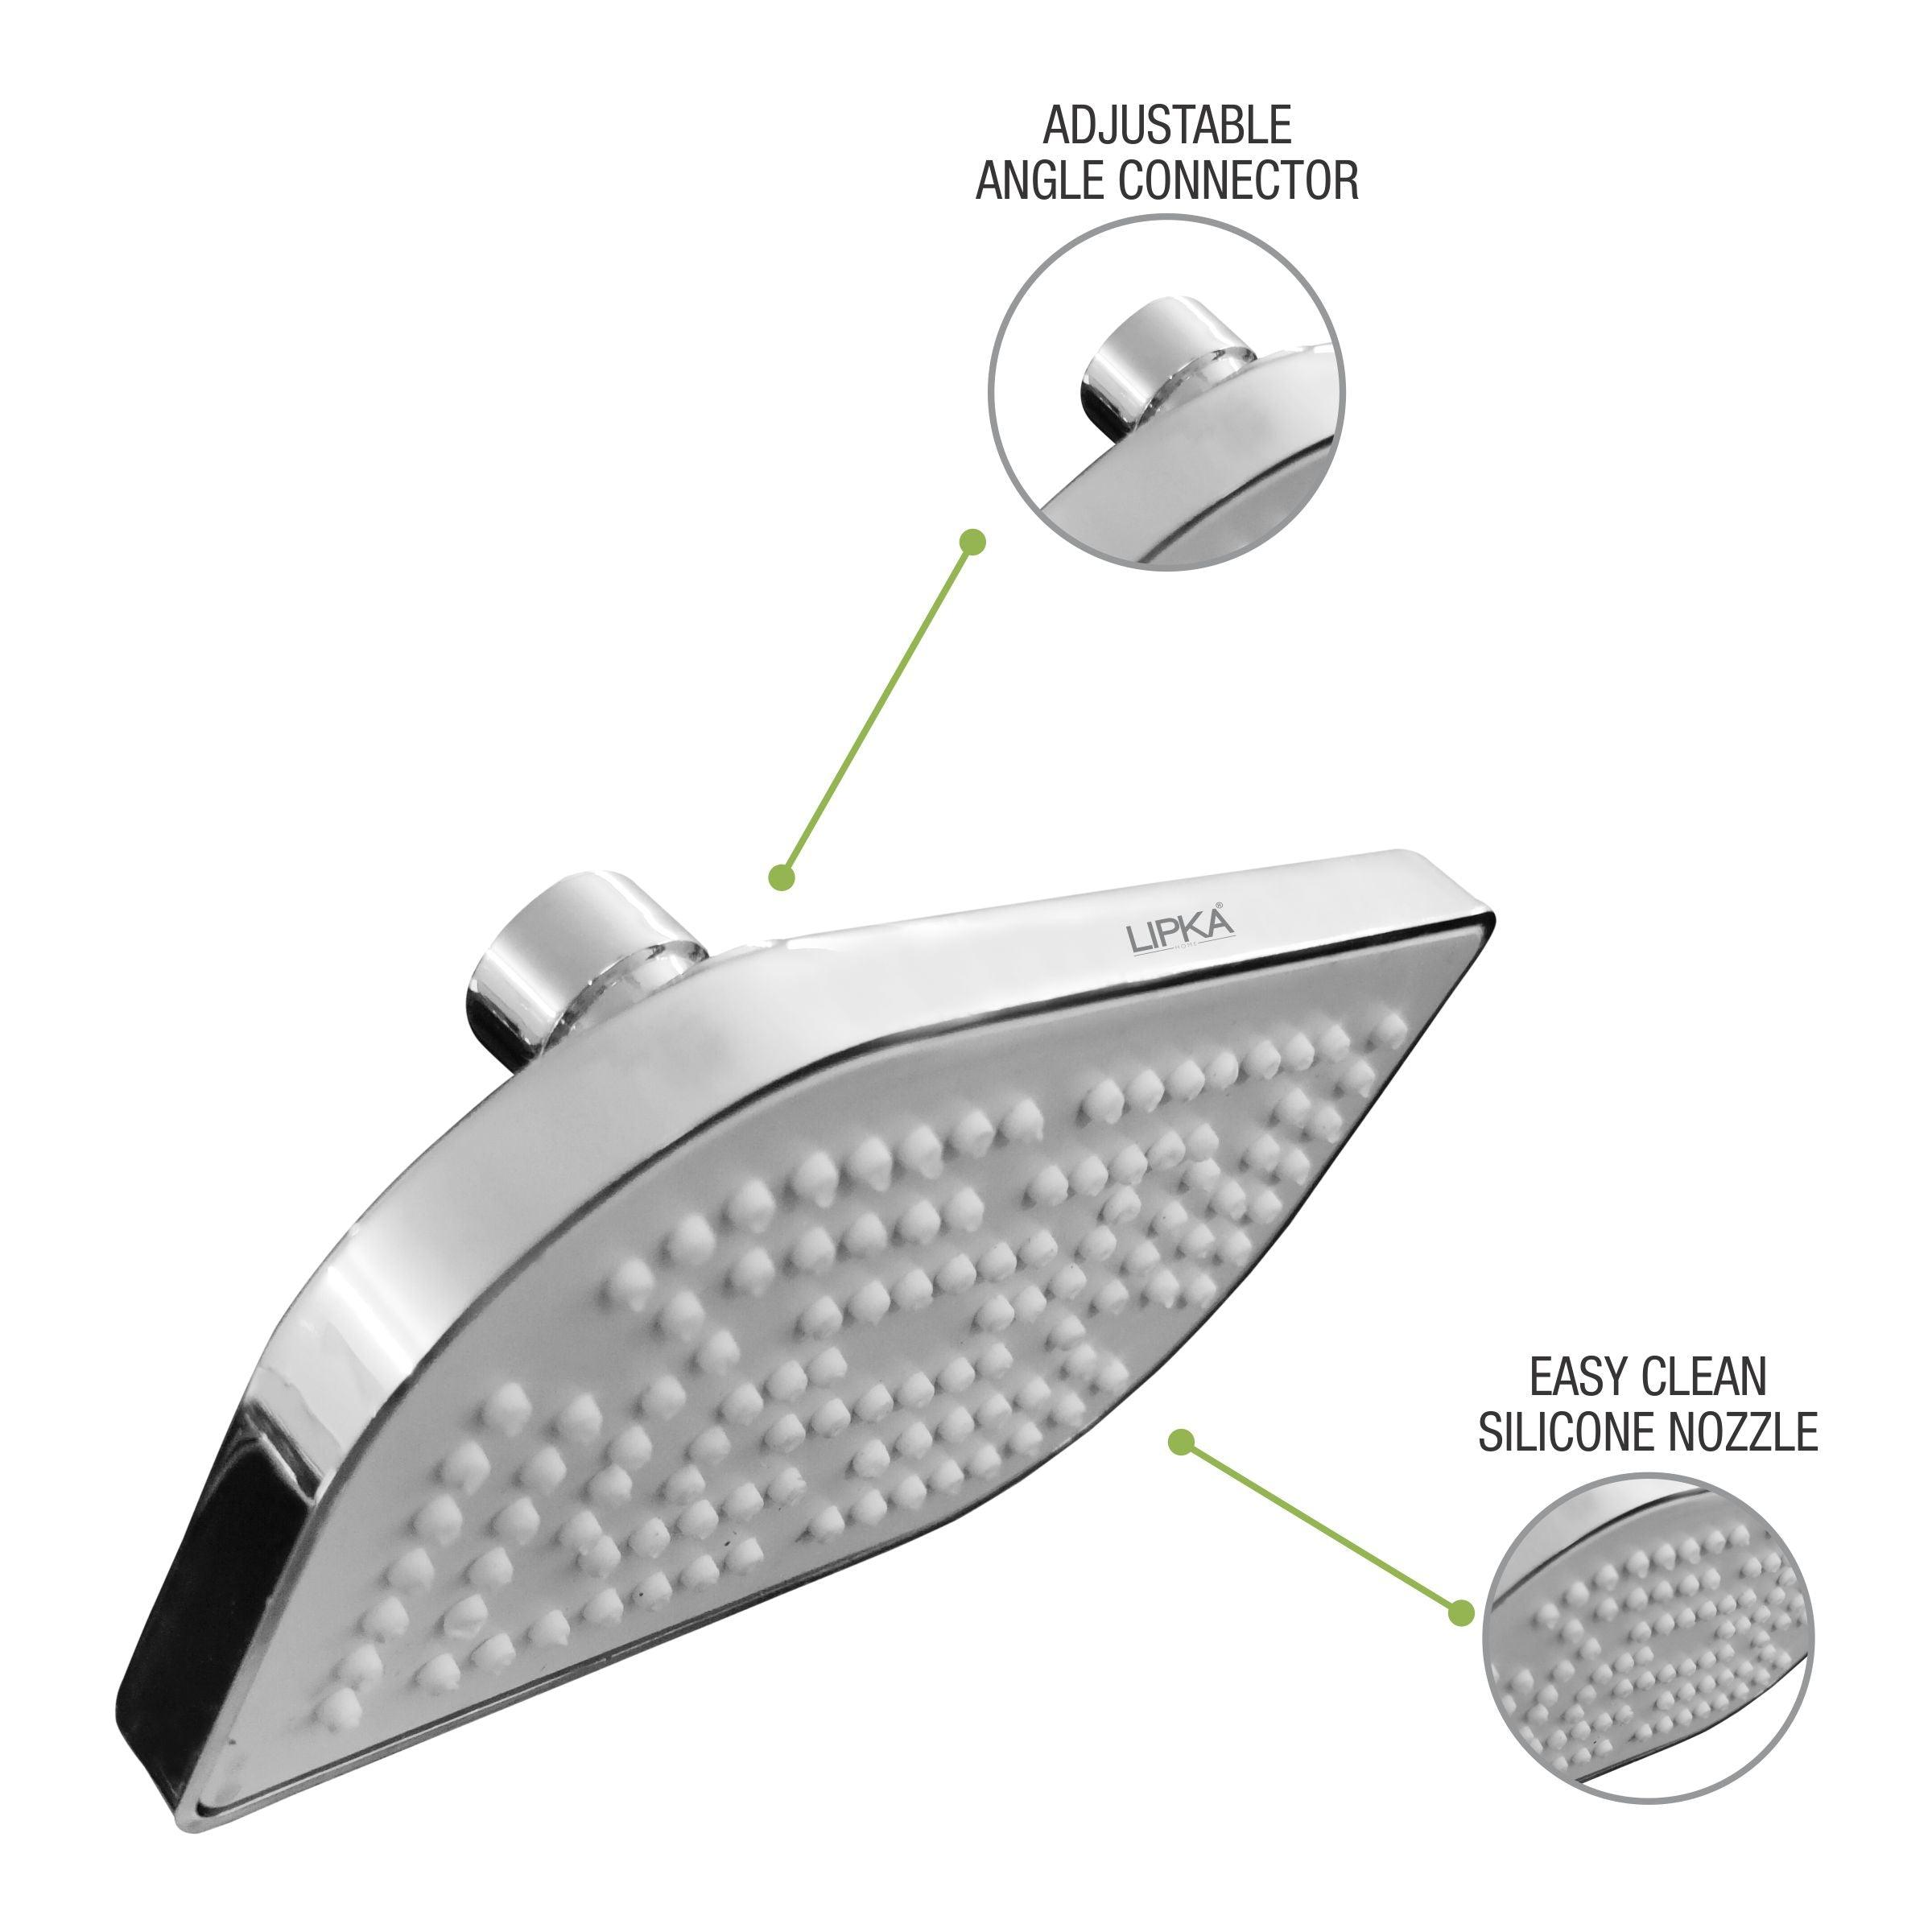 Madrid Overhead Shower (3.25 x 5 Inches) features